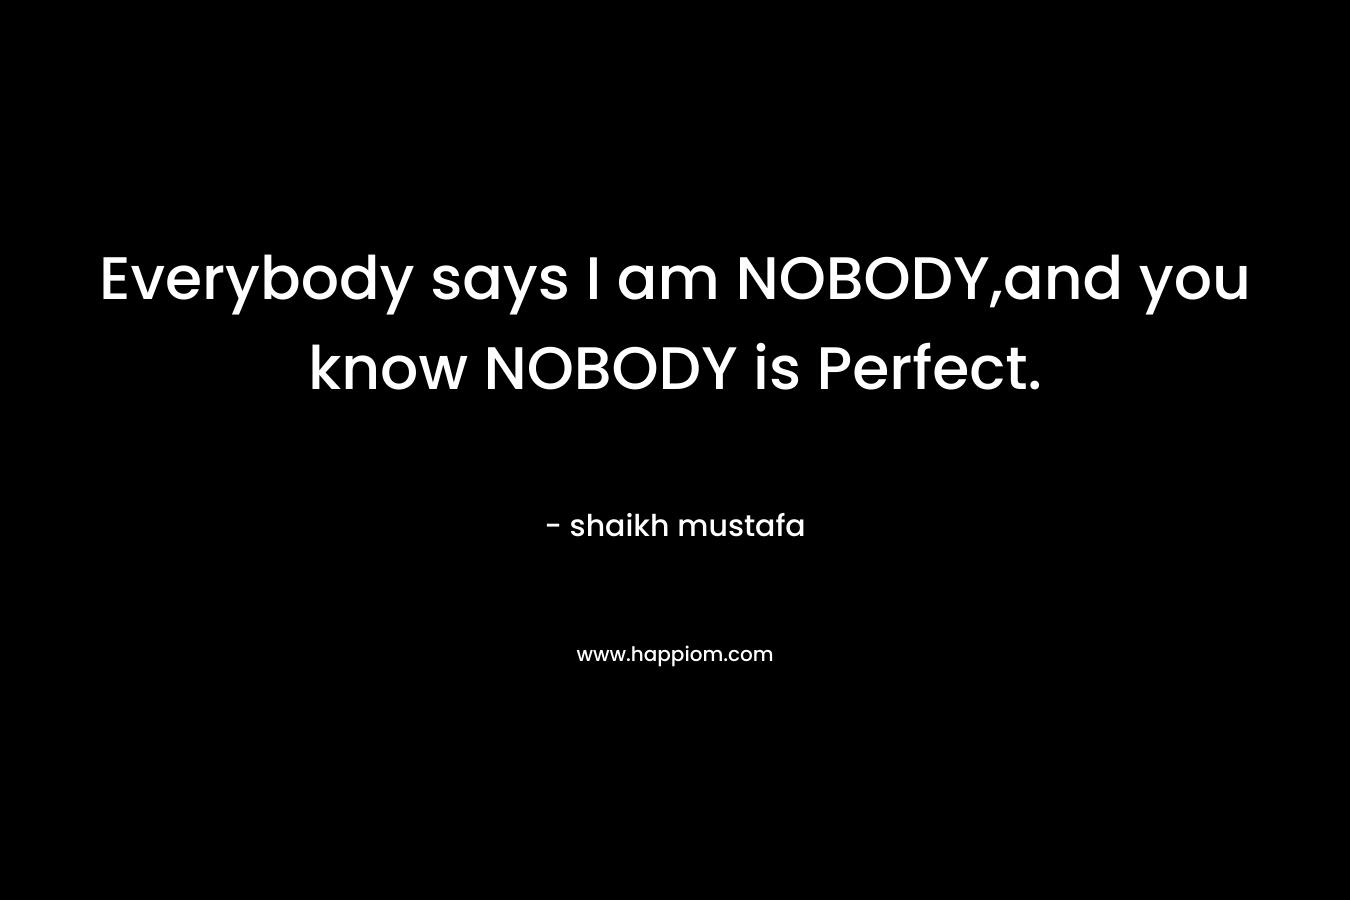 Everybody says I am NOBODY,and you know NOBODY is Perfect.